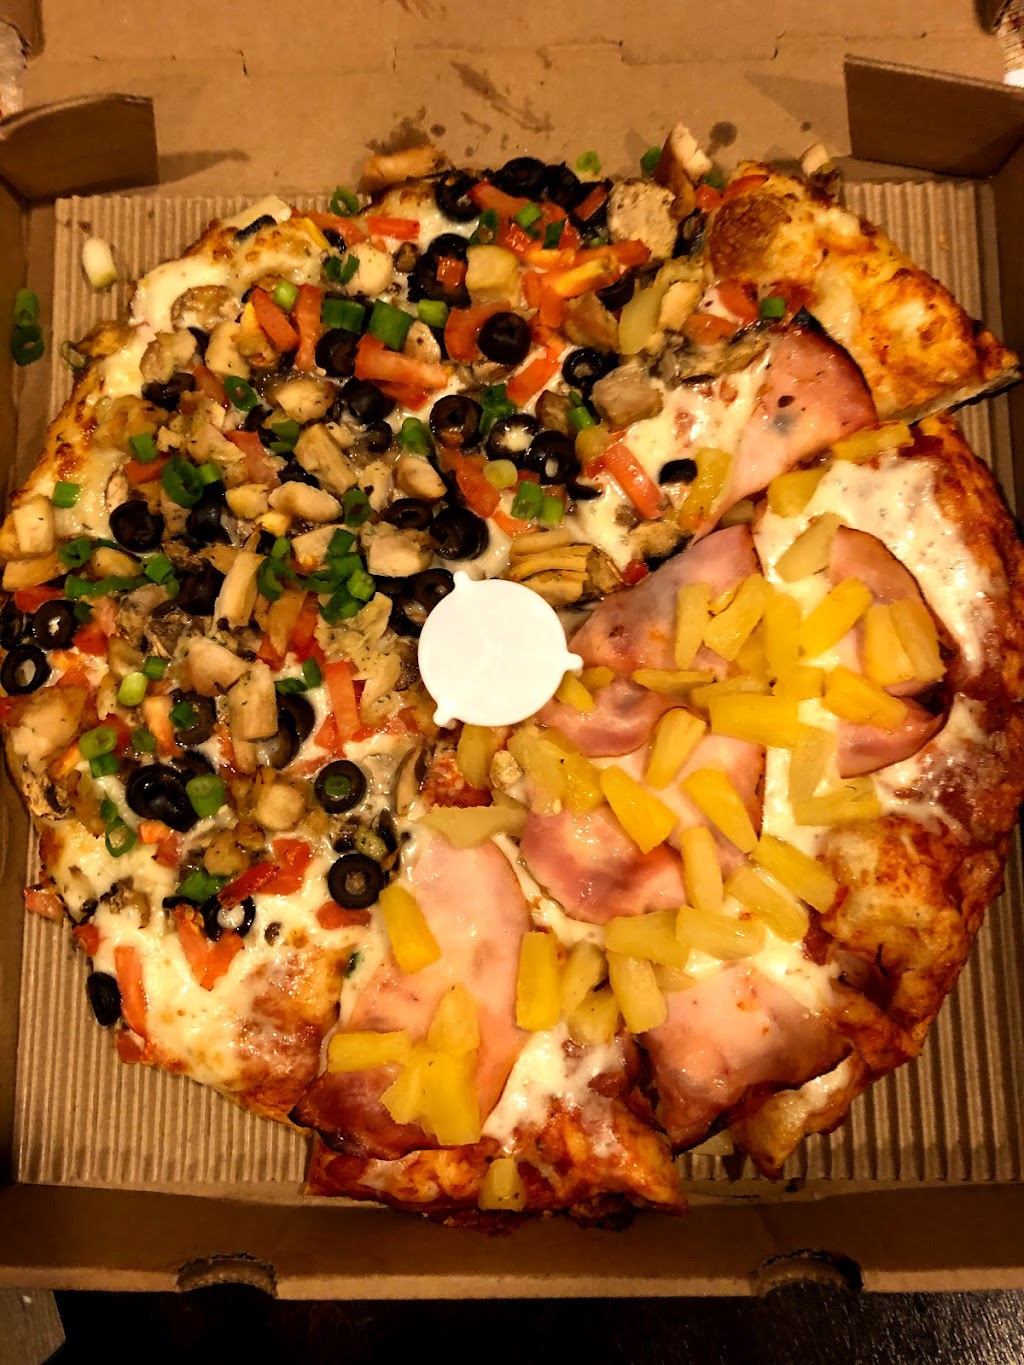 Mountain Mikes Pizza | 1185 2nd St Suite M, Brentwood, CA 94513, USA | Phone: (925) 308-4544